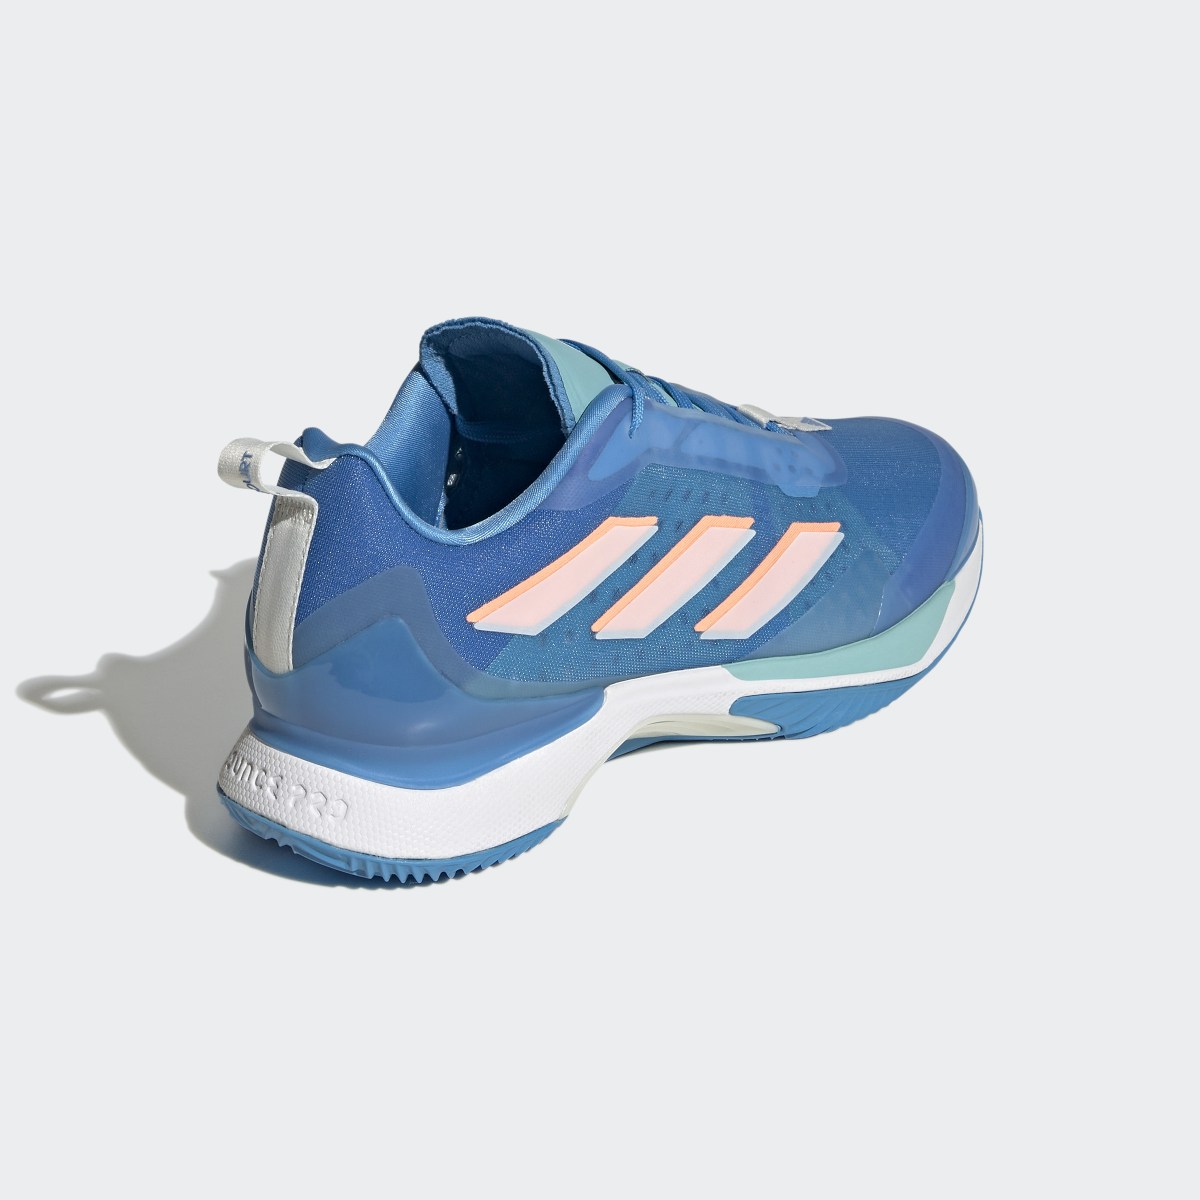 Adidas Avacourt Clay Court Tennis Shoes. 6